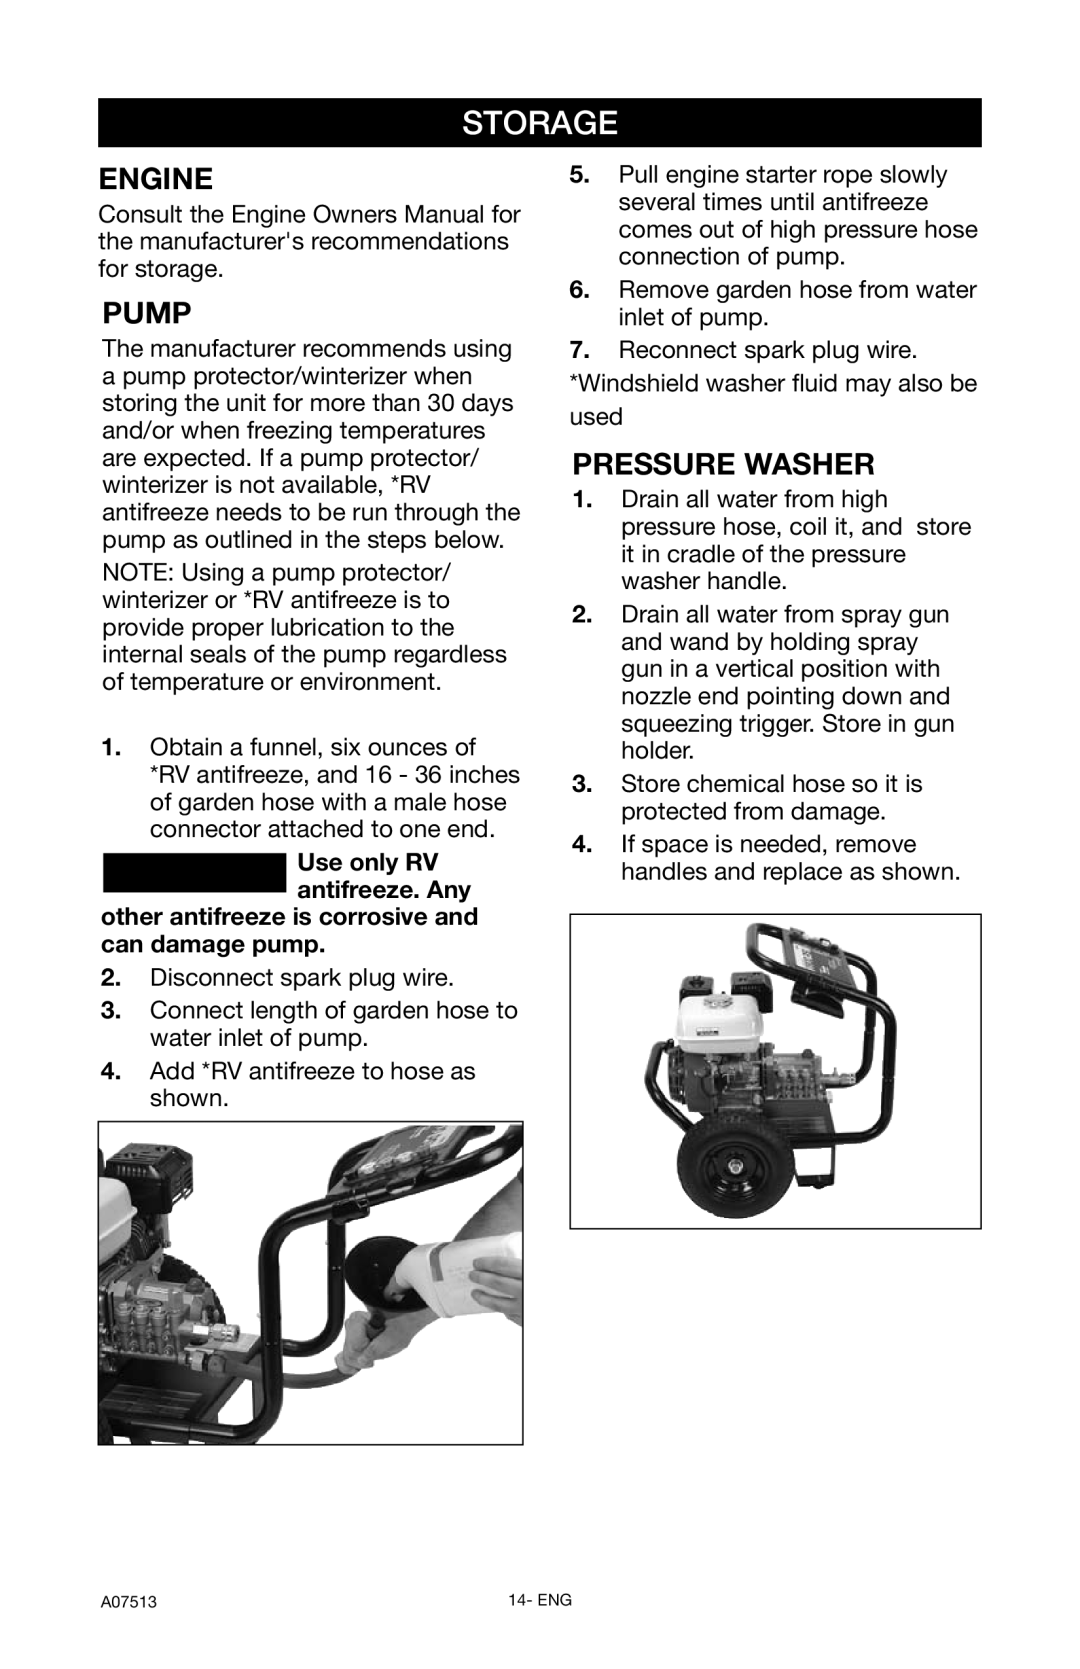 Porter-Cable A07513-0412-0 instruction manual Storage, Pressure Washer, Engine, Pump 